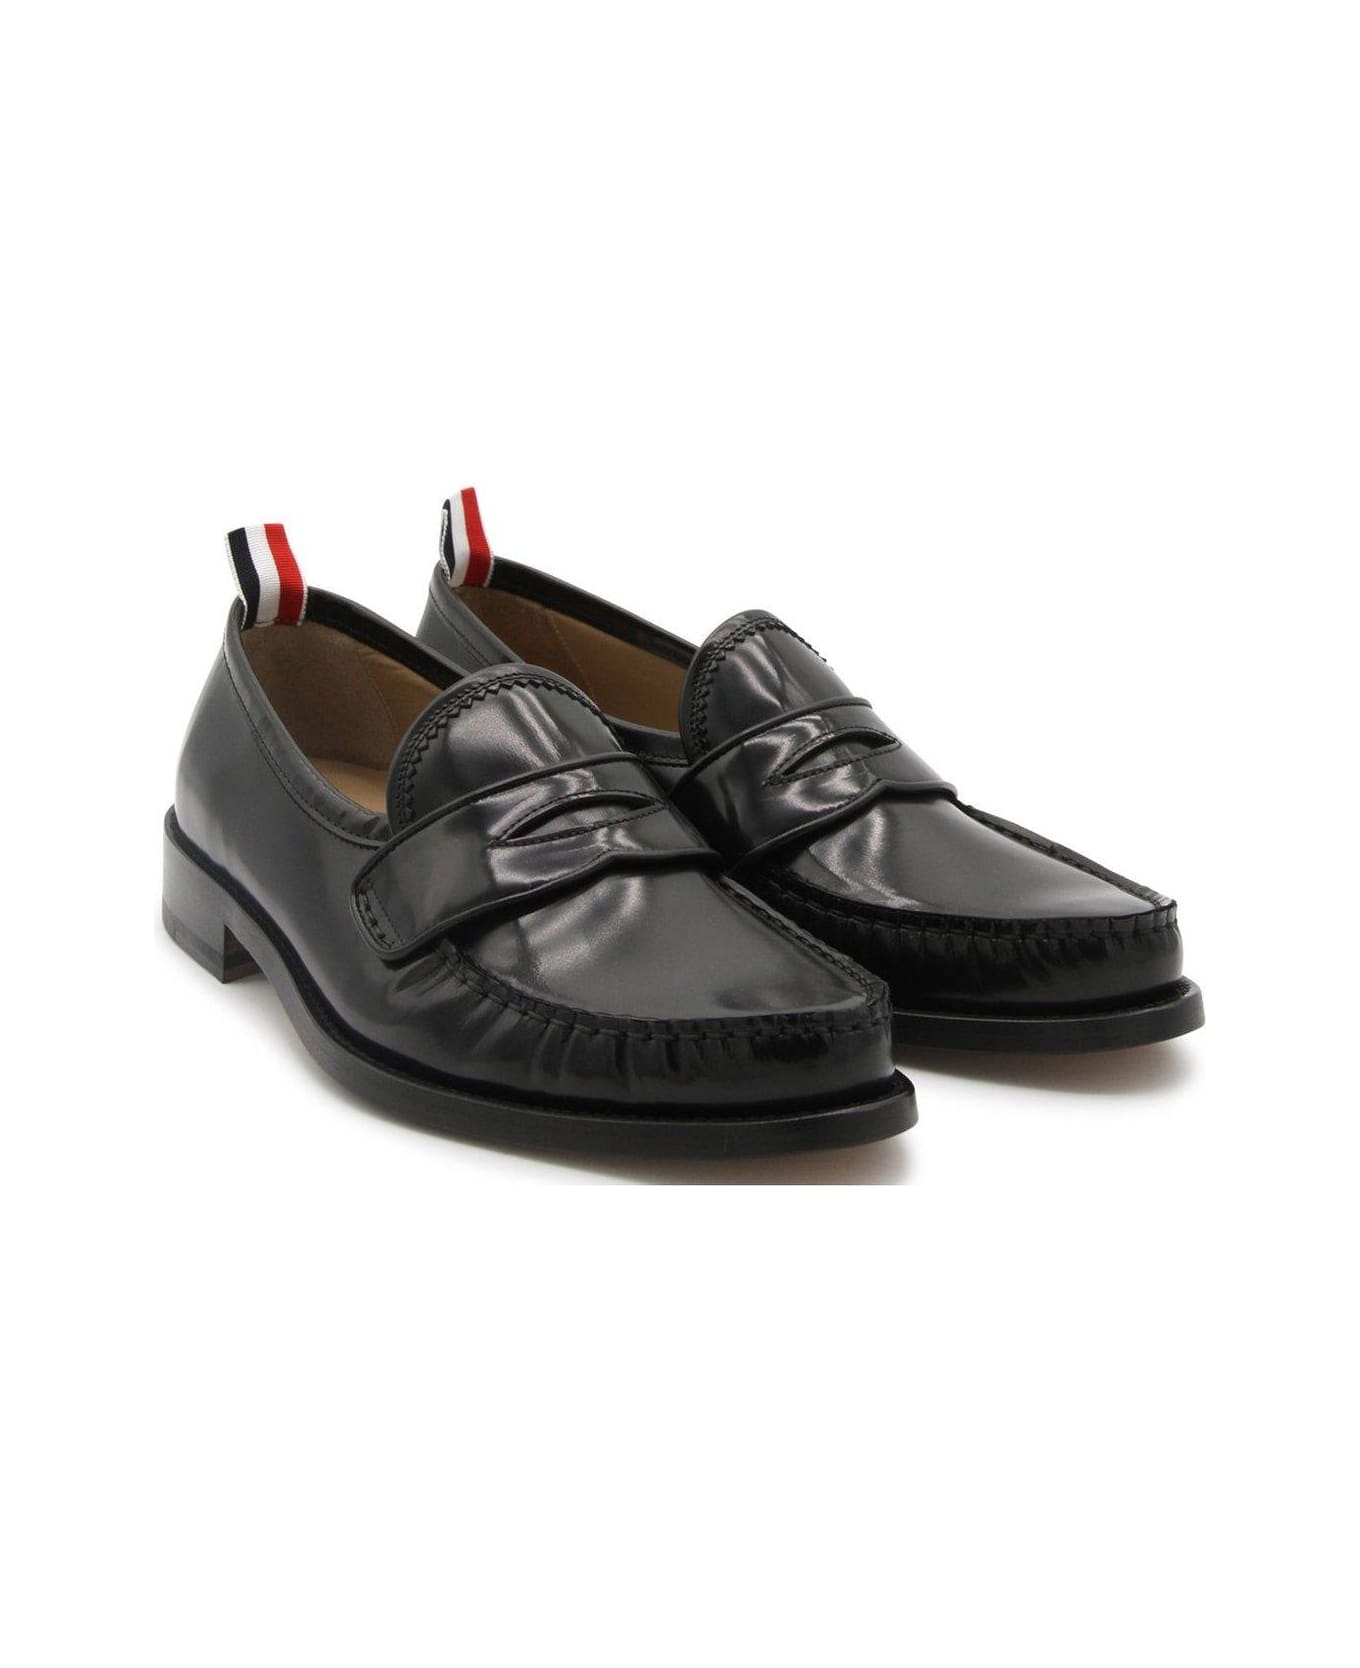 Thom Browne Almond Toe Penny-slot Loafers - Black ローファー＆デッキシューズ